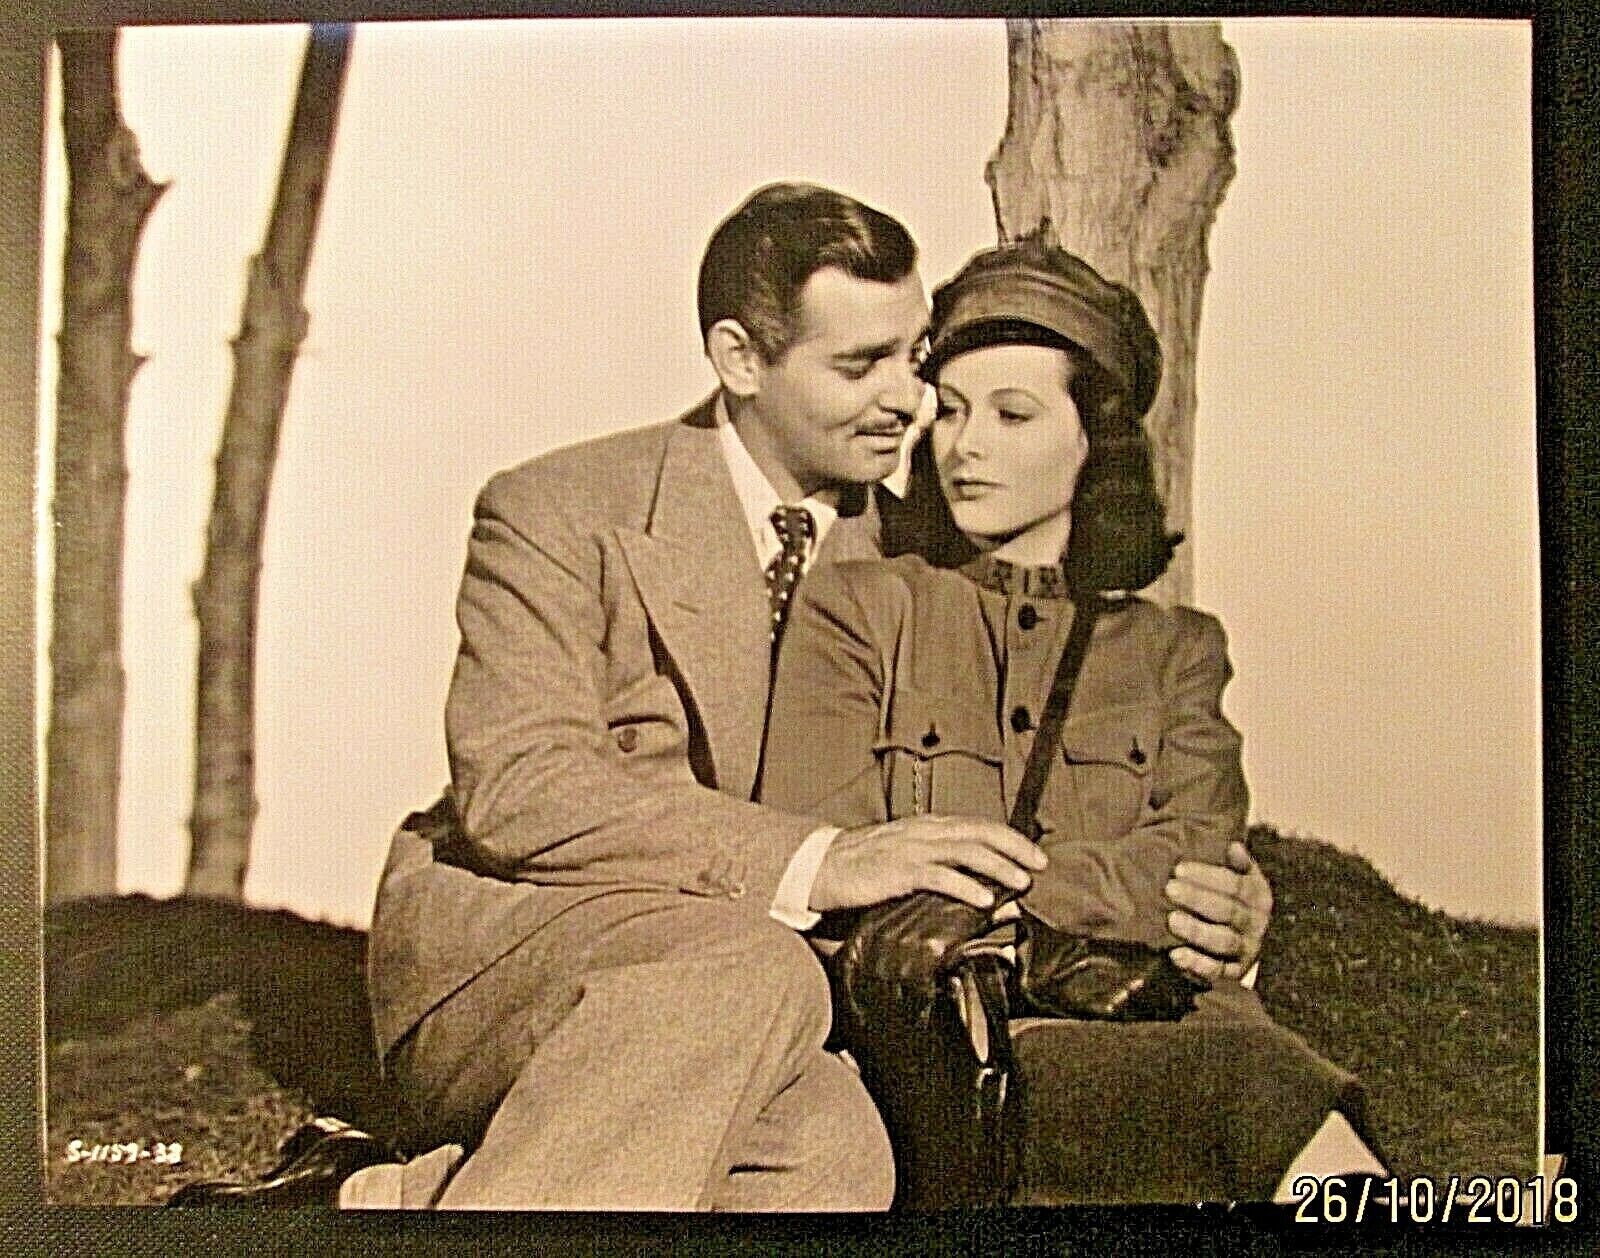 CLARK GABLE HEDY LAMARR (COMRADE X) ORIG, 1940 RARE CLARENCE BULL Photo Poster painting *